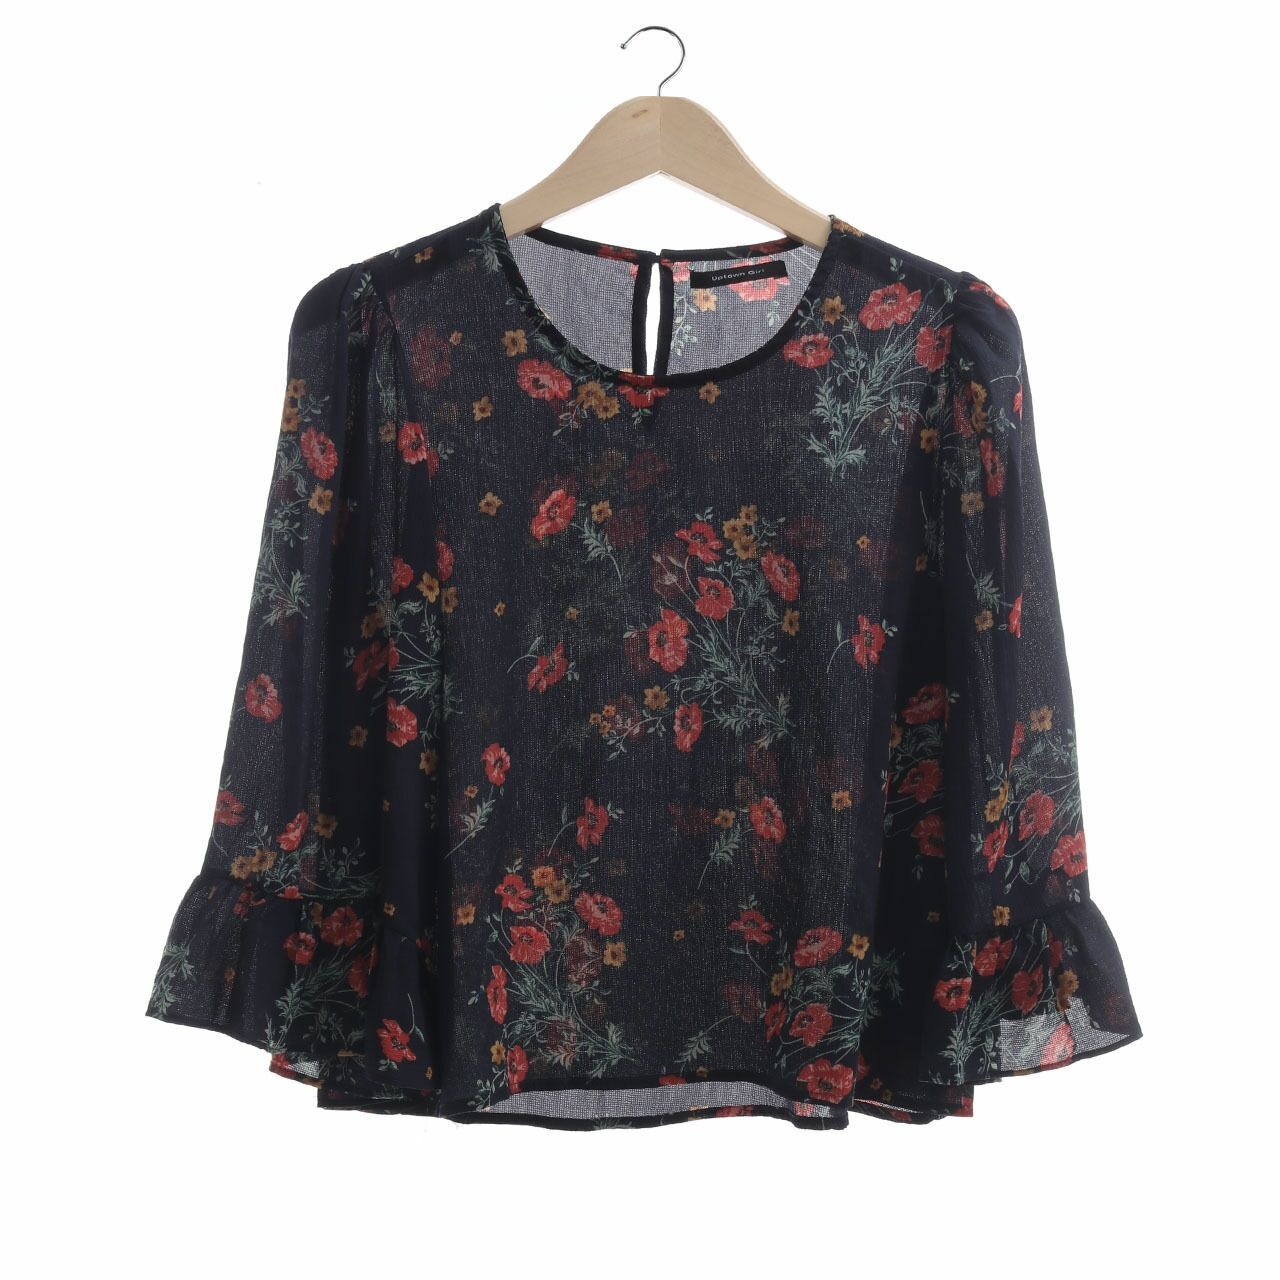 Uptown Girl Navy Floral Blouse